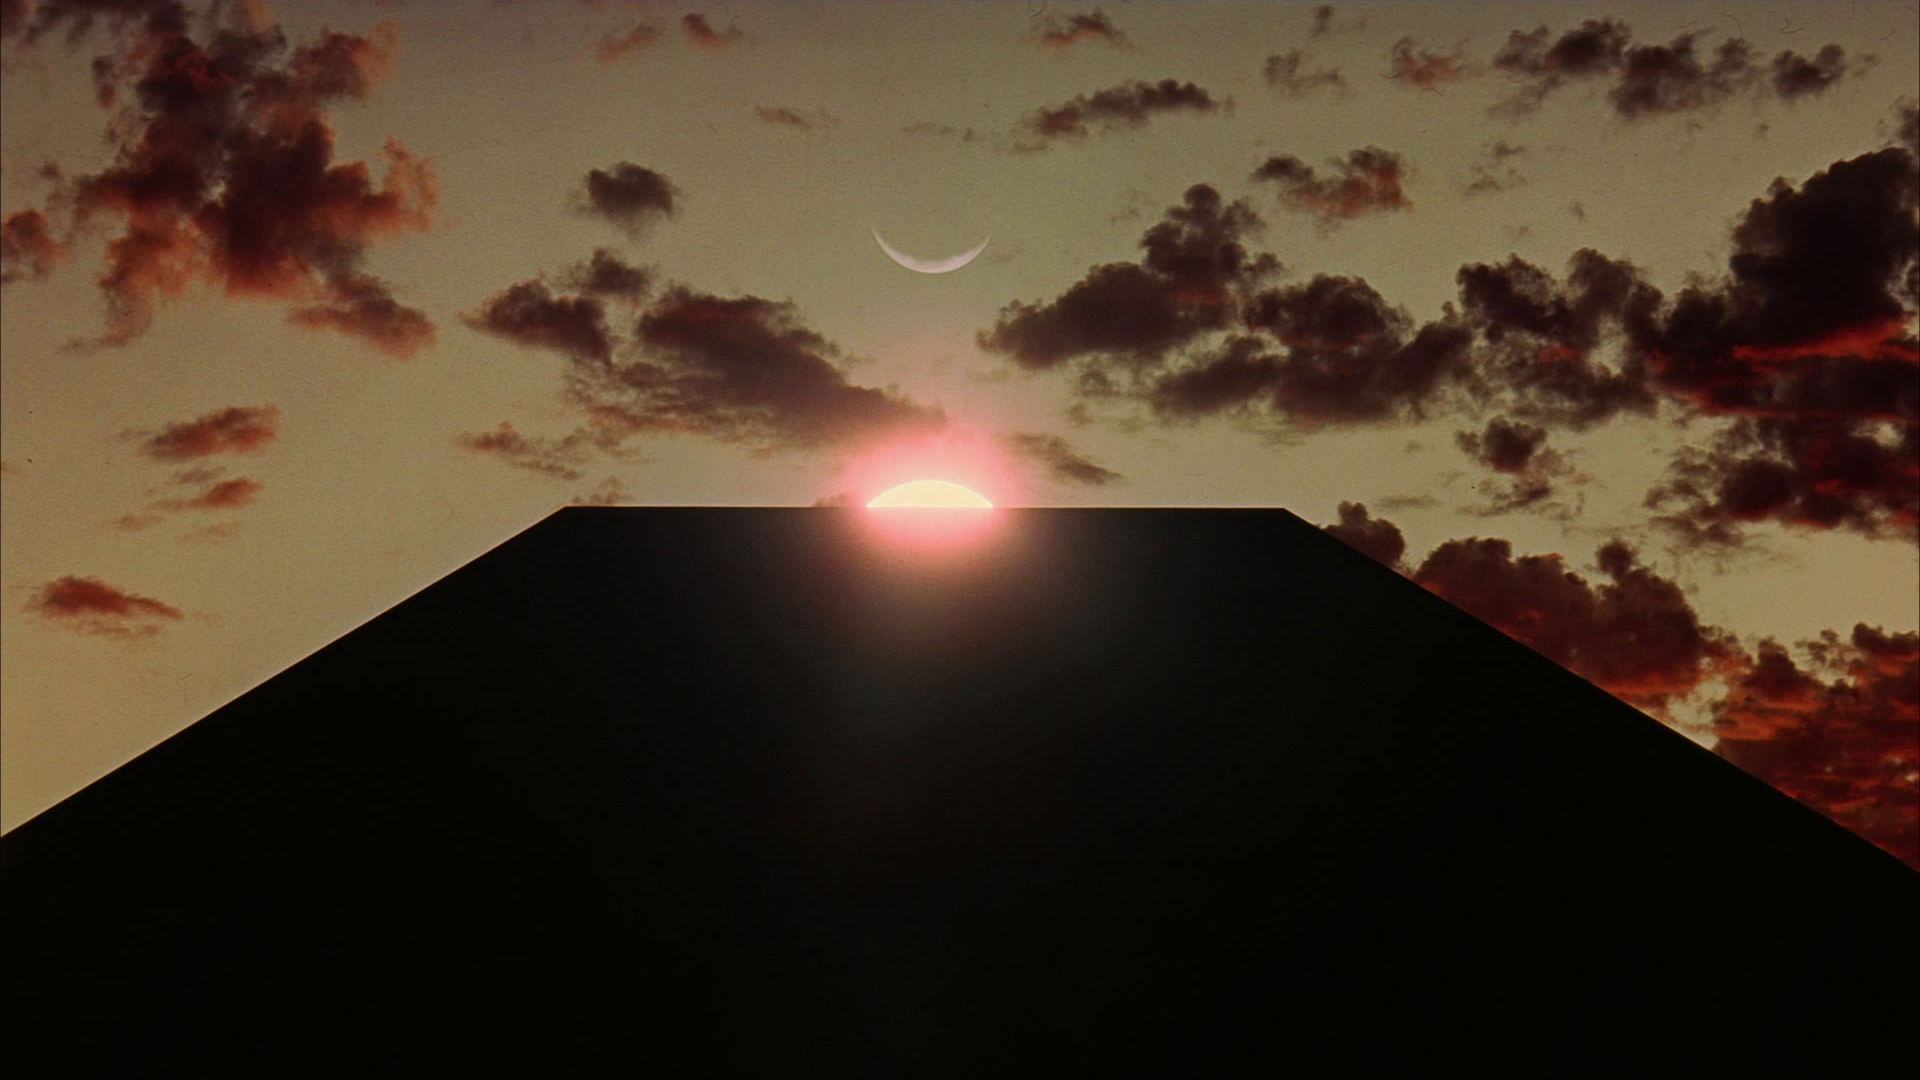 2001 A Space Odyssey - The monolith